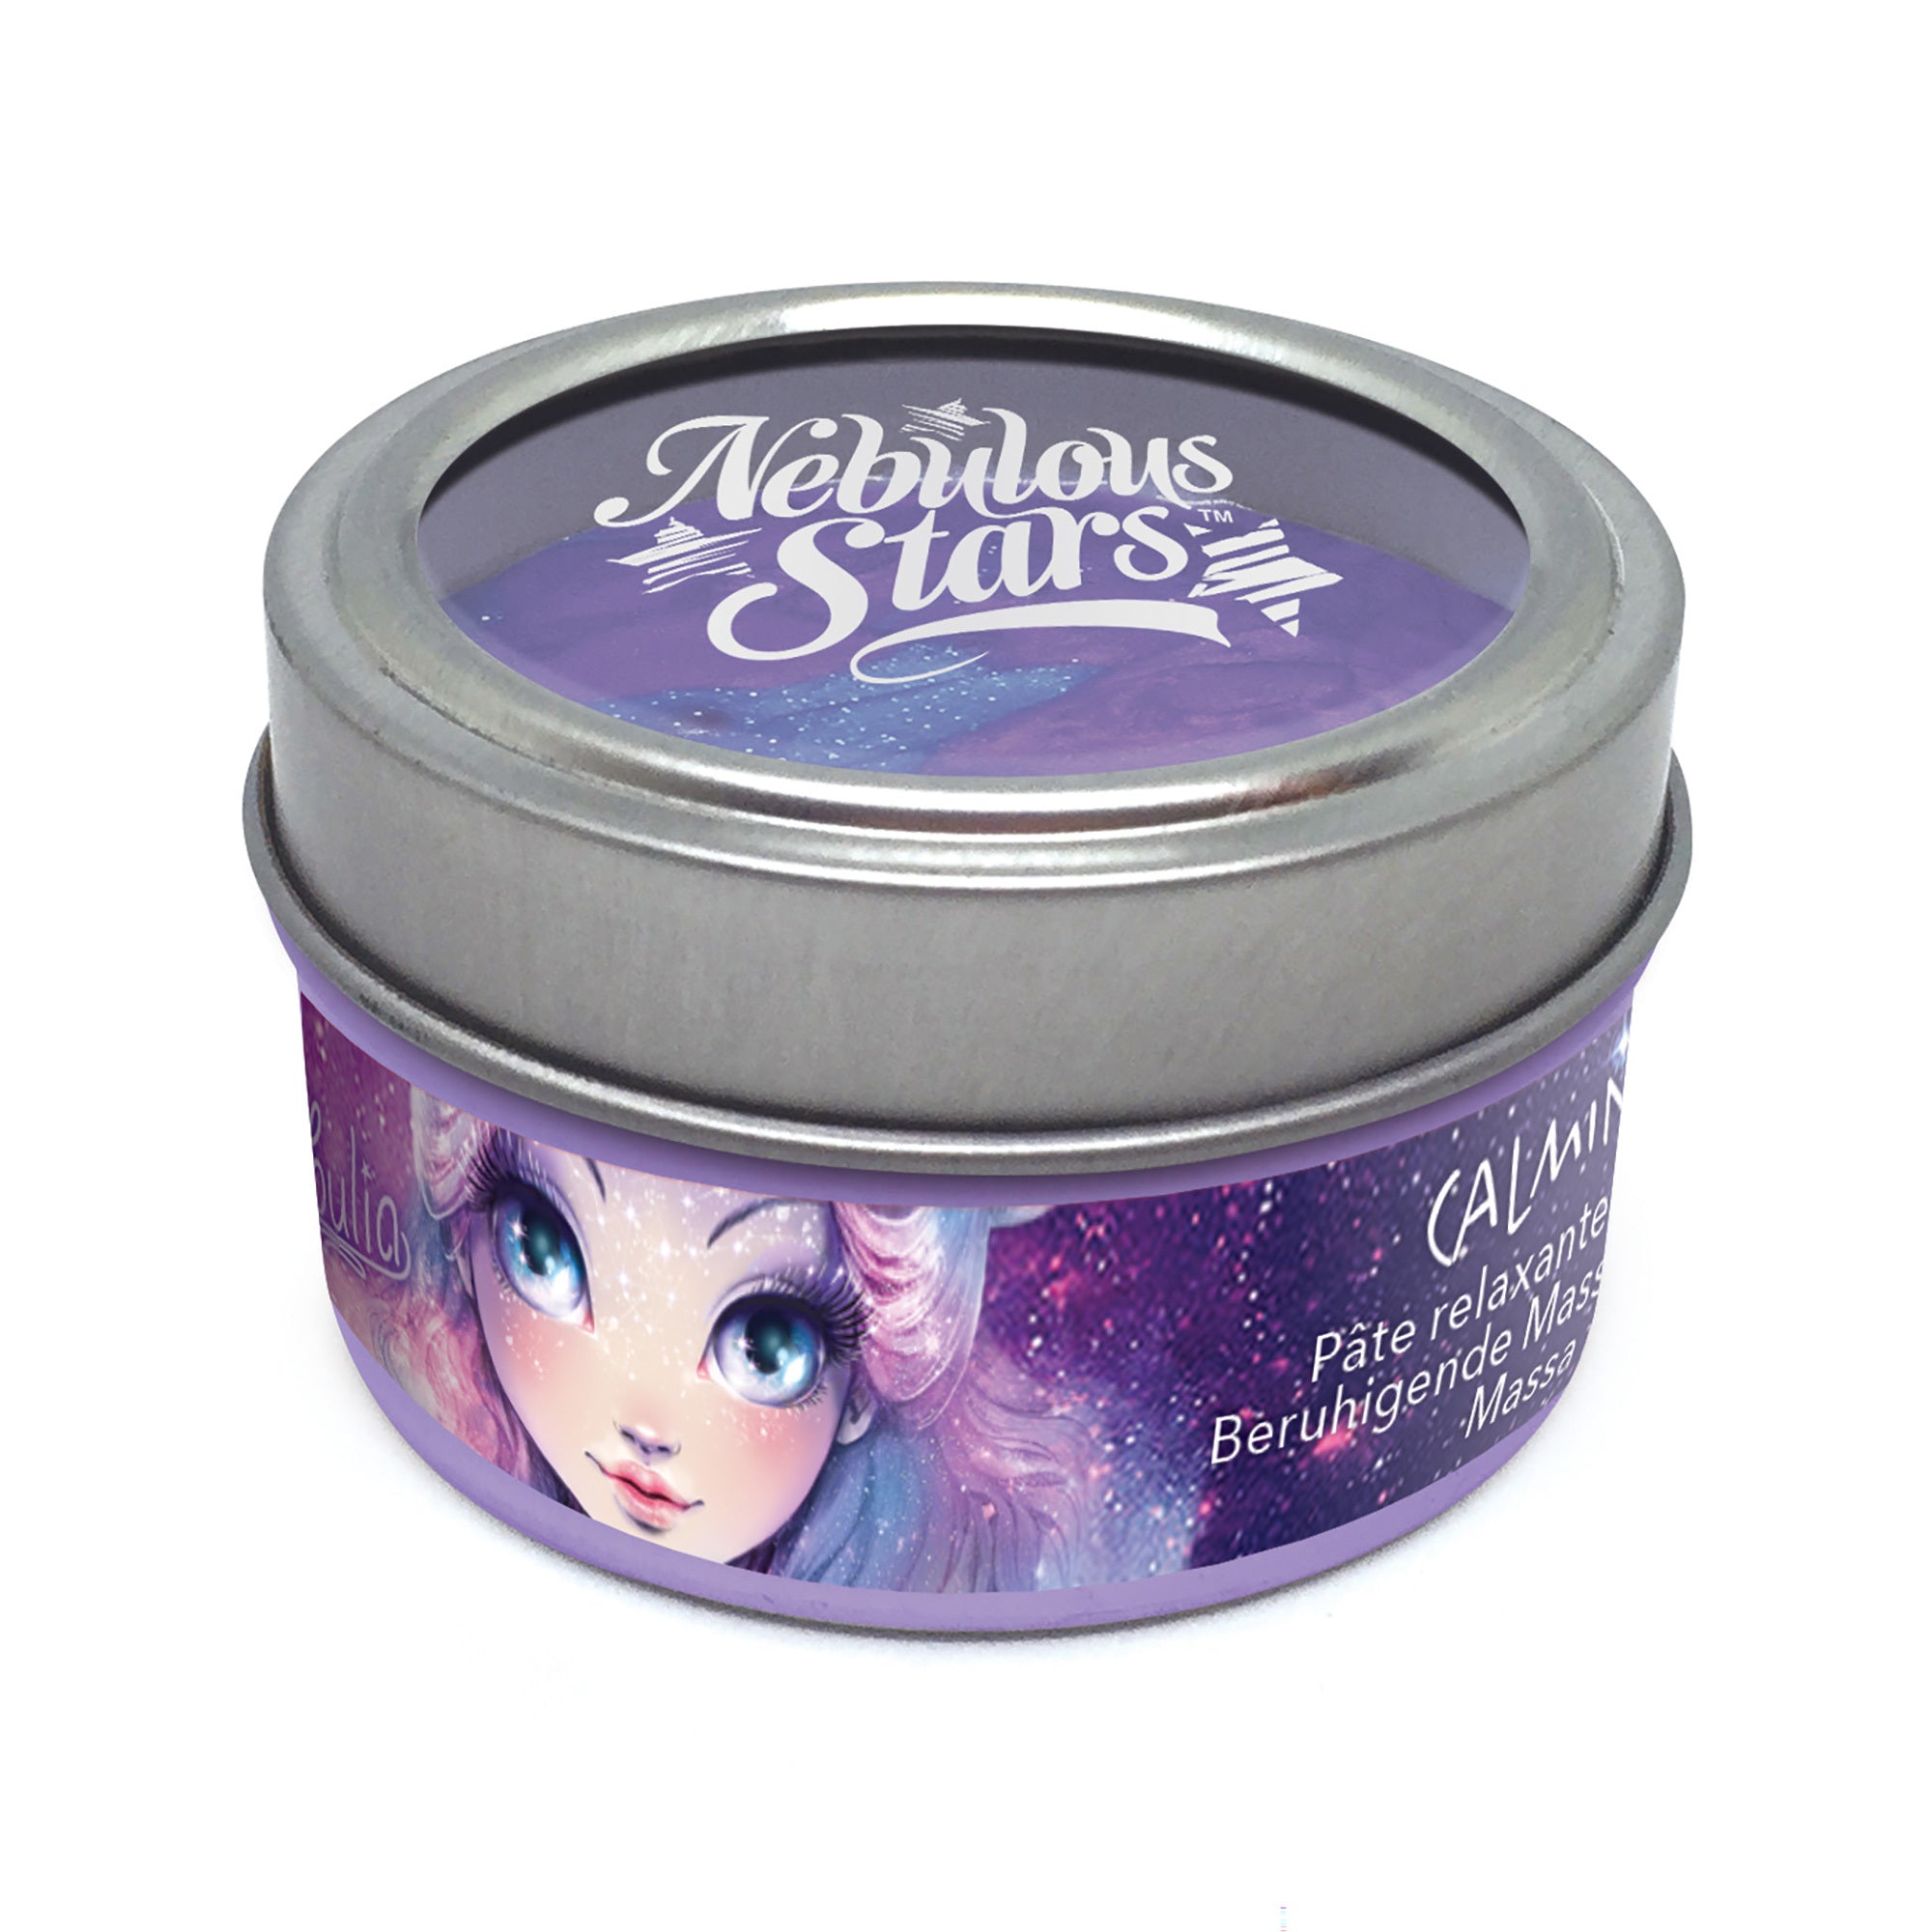 Nebulous Stars Galaxy Effect Calming Putty, 1 Count